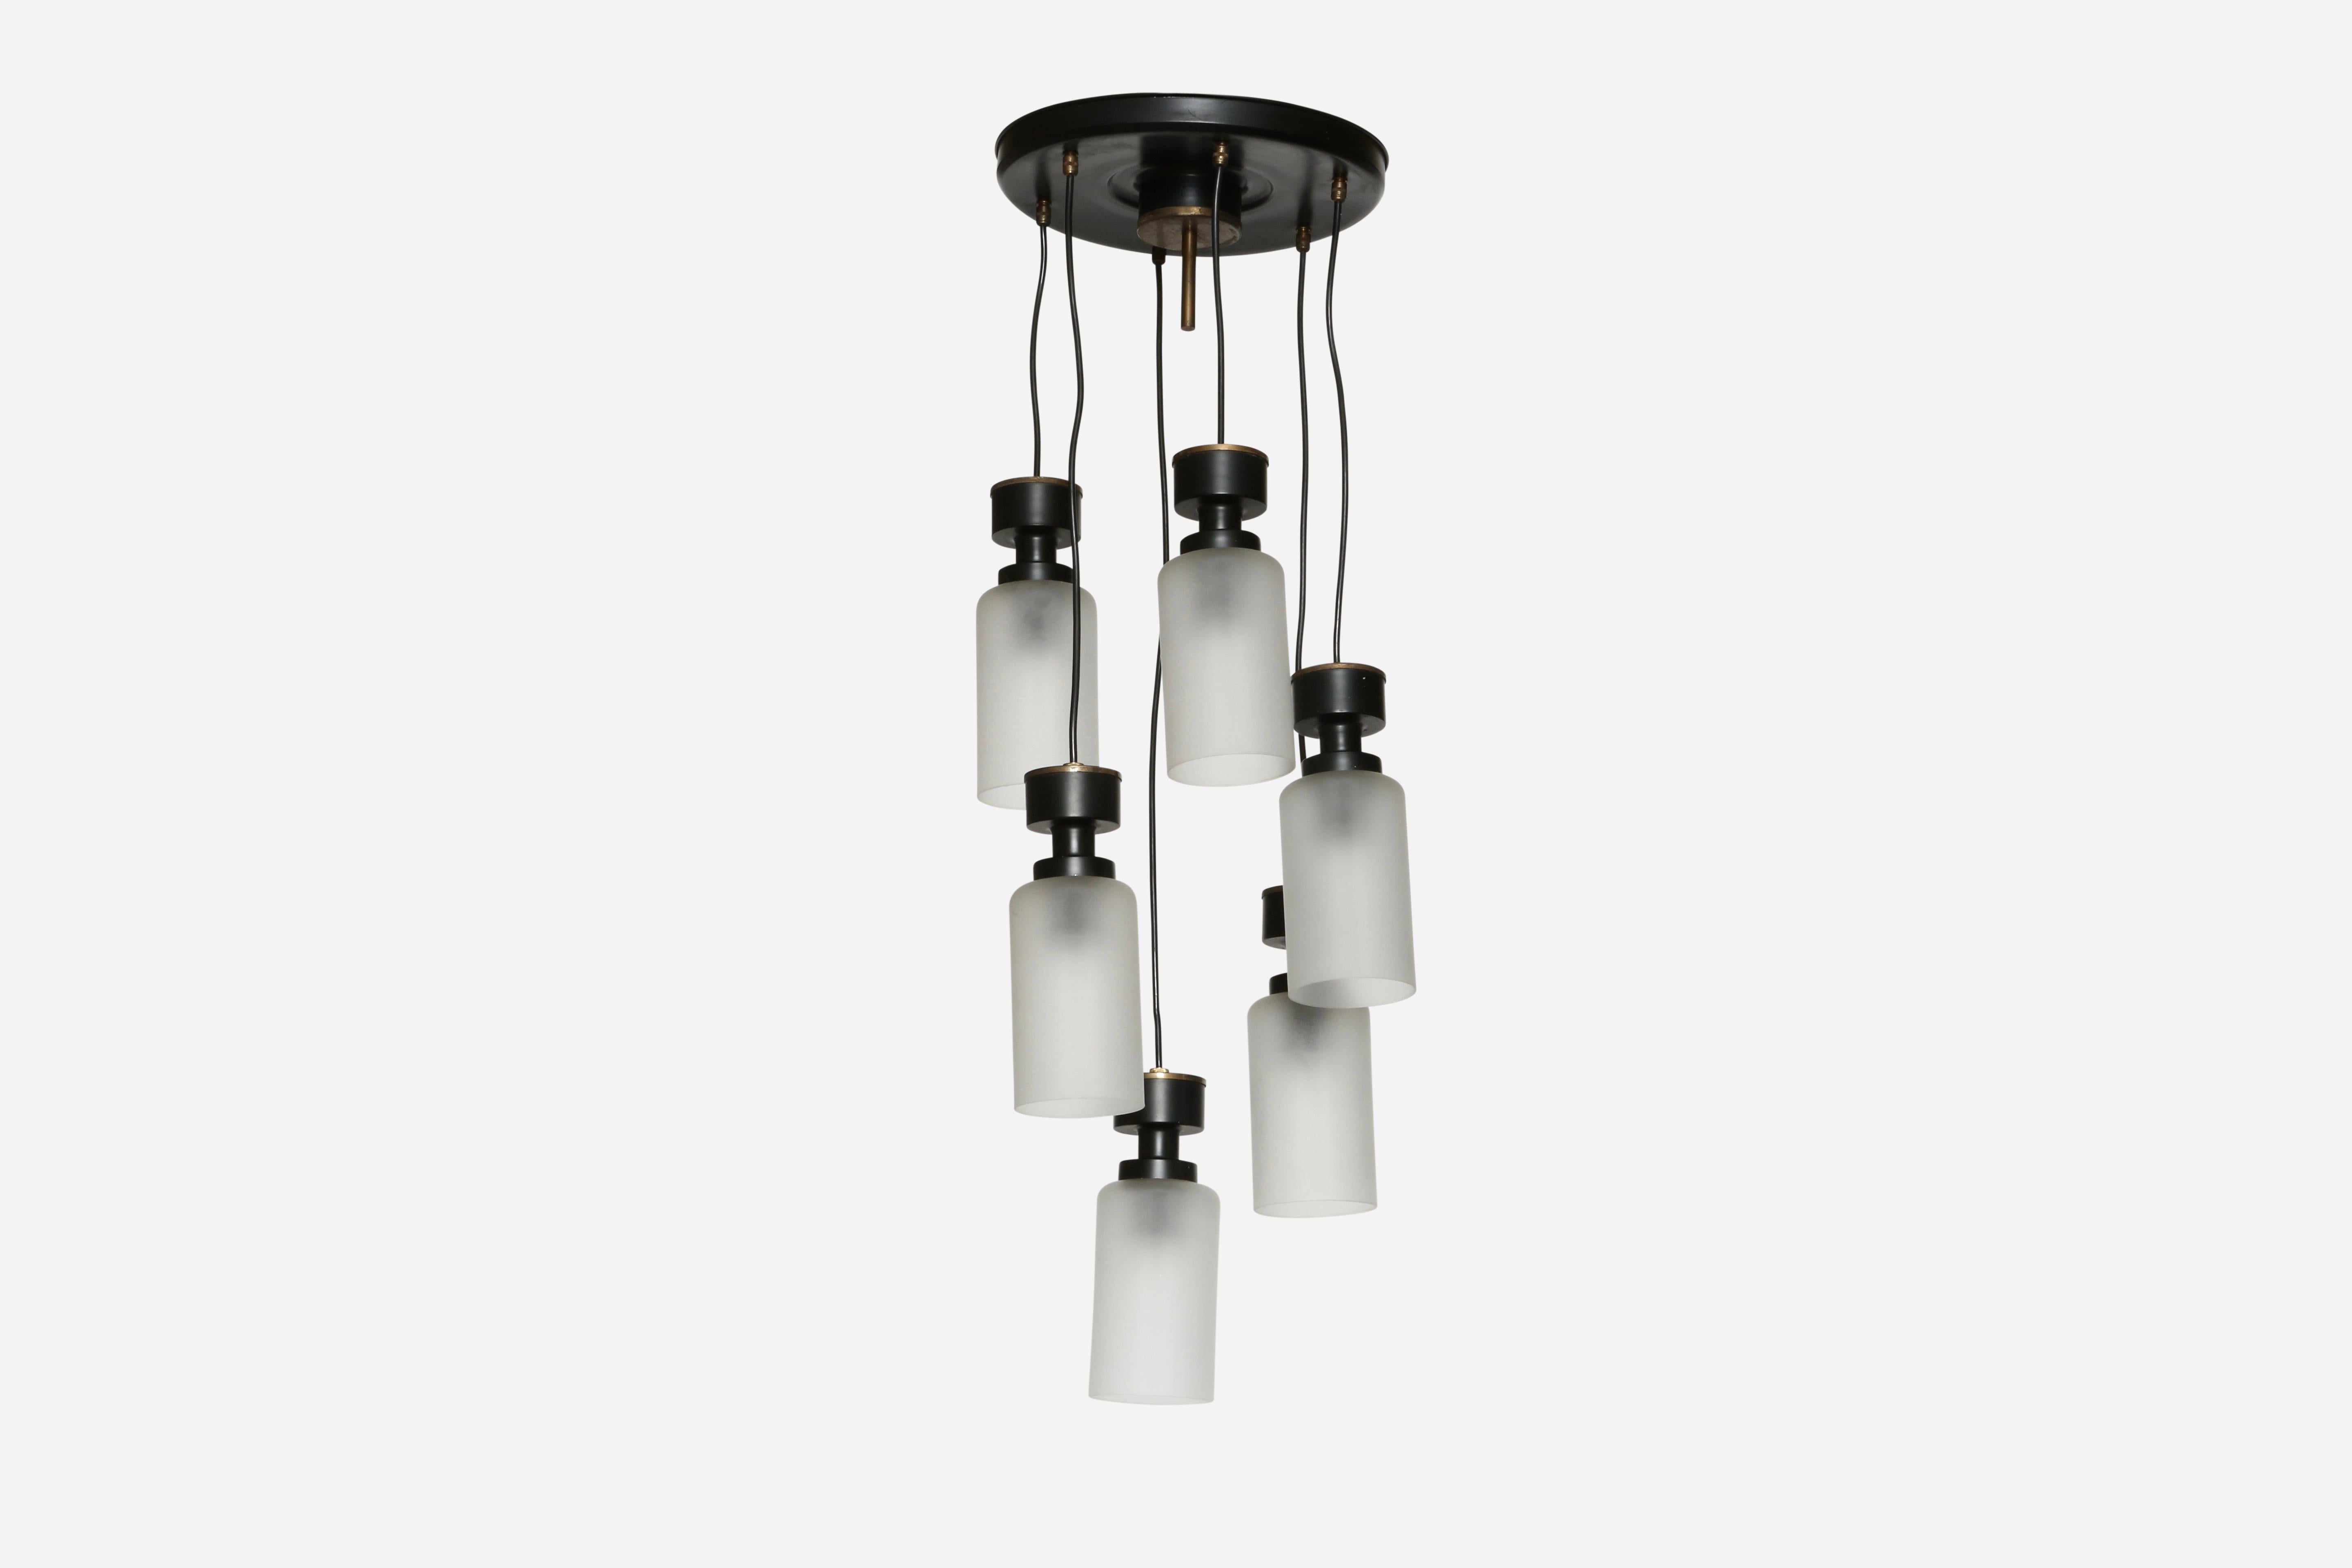 Stilnovo chandelier, attributed.
Designed and manufactured in Italy, 1960s.
Six glass bells with sandblasted glass.
Candelabra sockets.
Complimentary US rewiring upon request.

We take pride in bringing vintage fixtures to their full glory again.
At